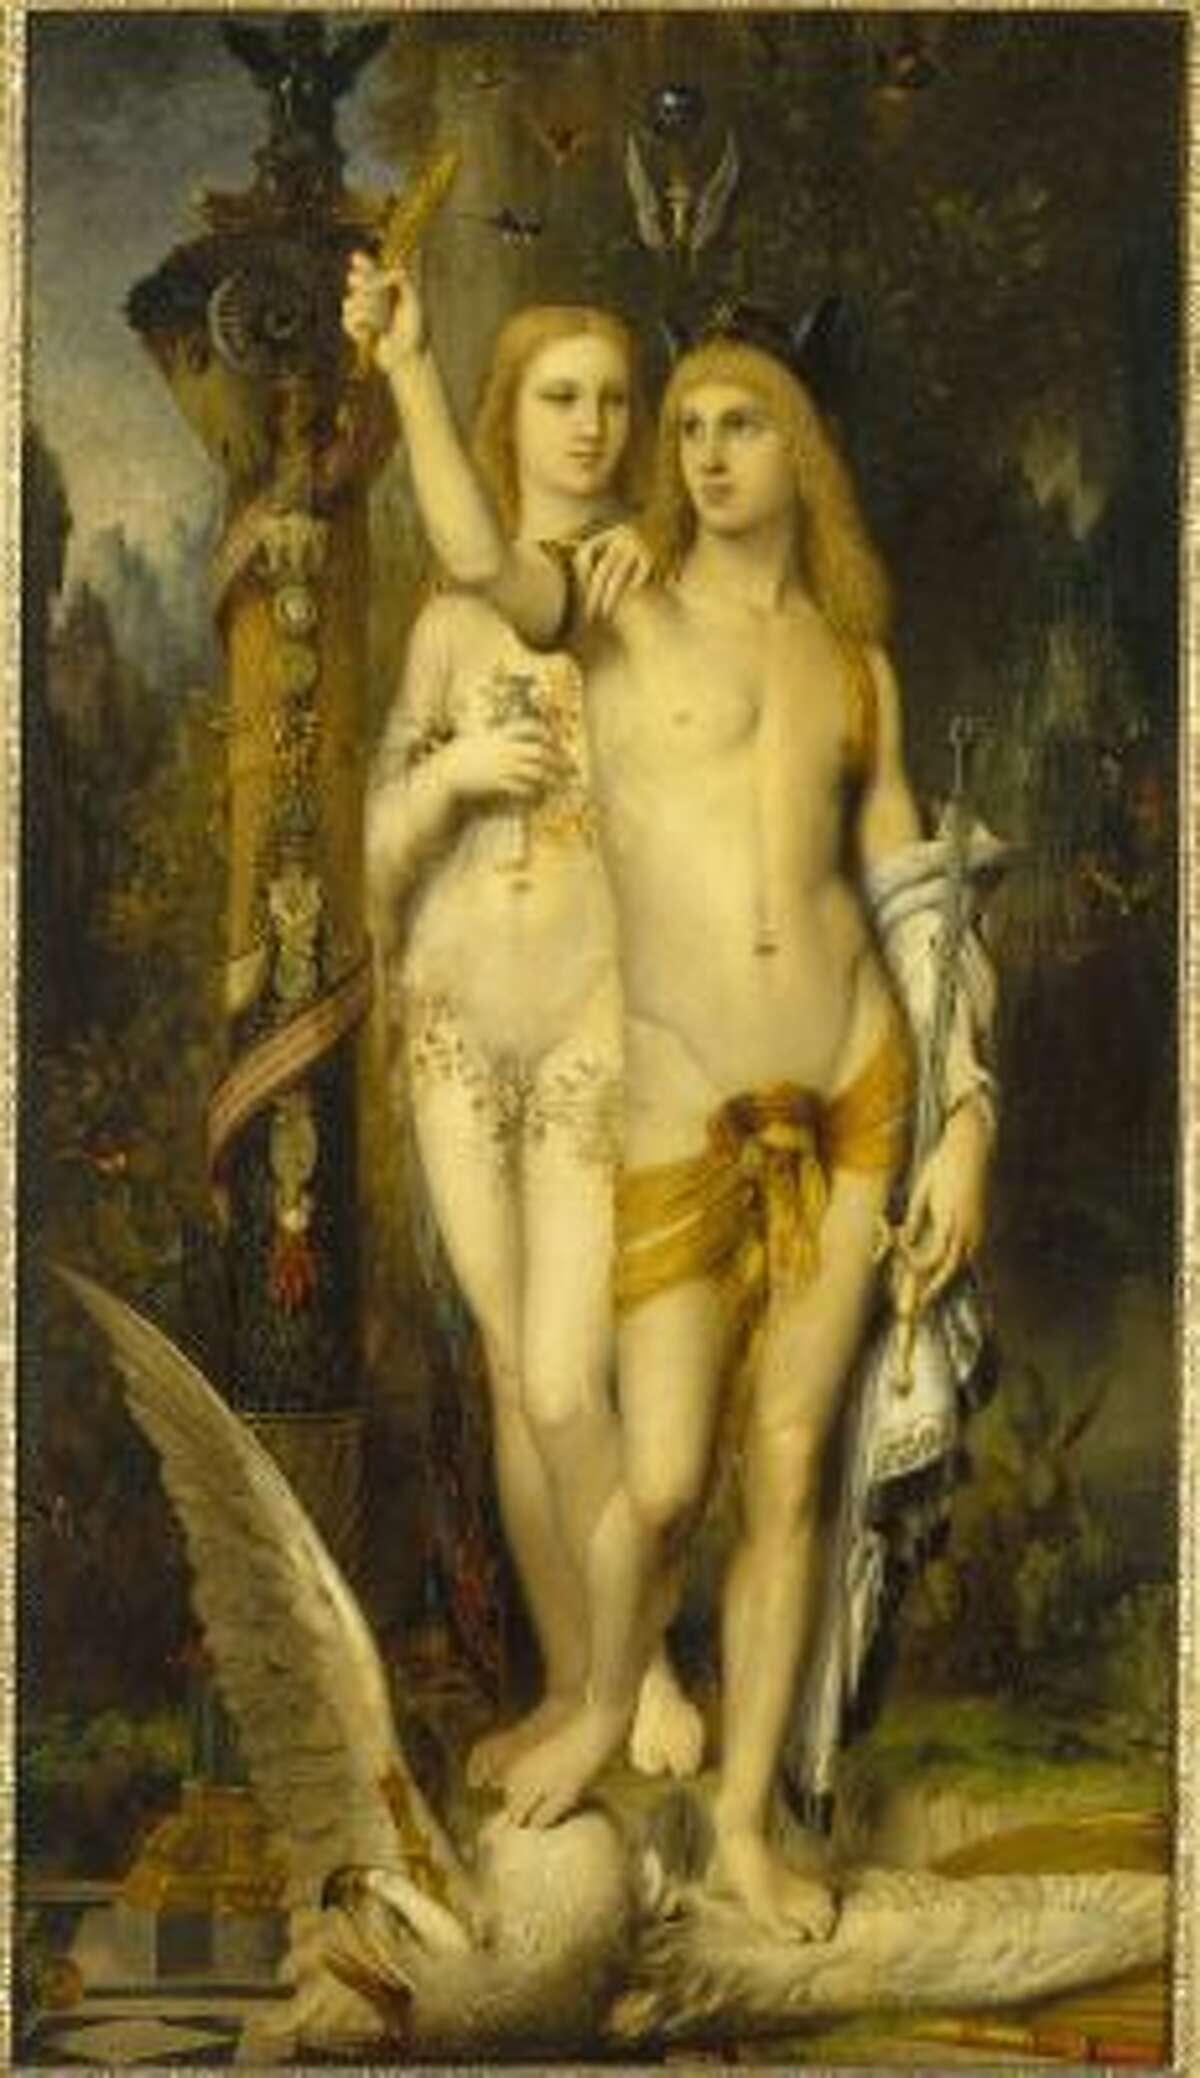 "Jason and Medea" (1865) by Gustave Moreau is part of "Masculin/Masculin _ The Nude Man in Art from 1800 to the Present Day" at the Musee d' Orsay in Paris through Feb 2.